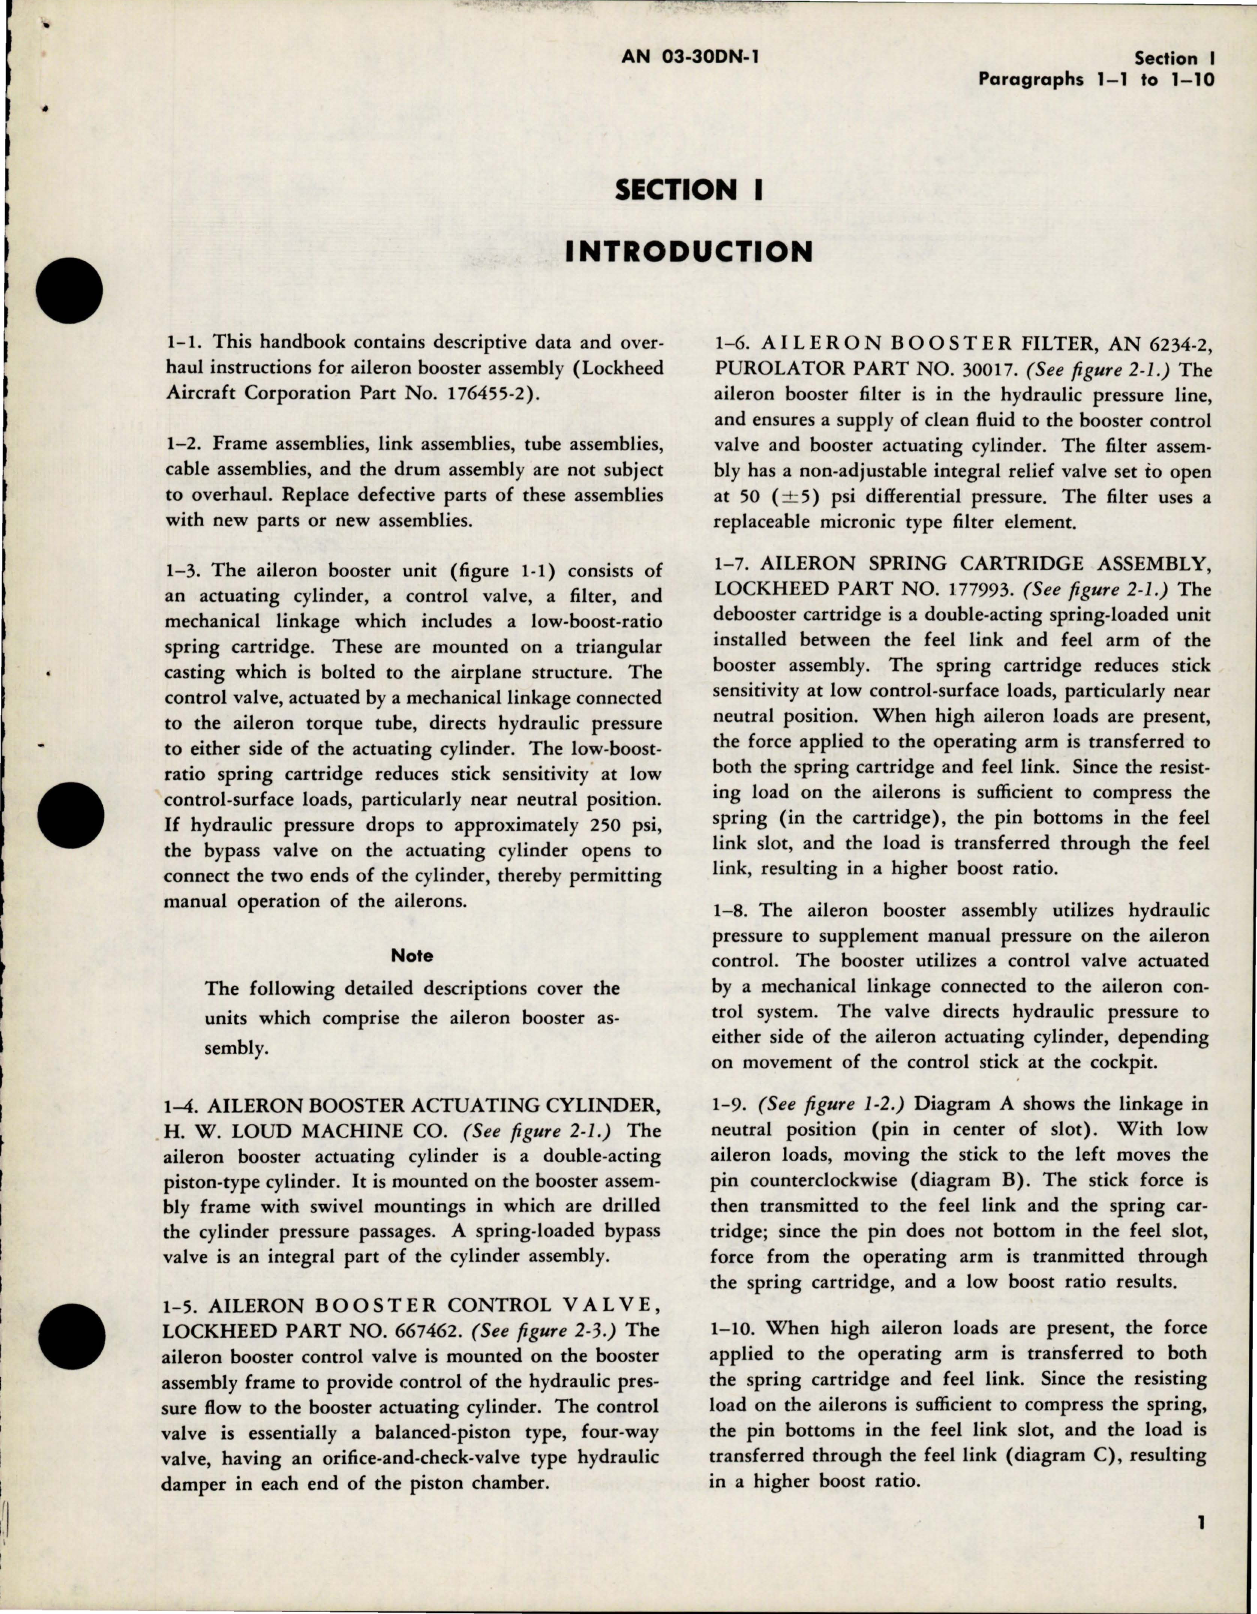 Sample page 5 from AirCorps Library document: Overhaul Instructions for Aileron Control Booster Assembly - Part 176455-2